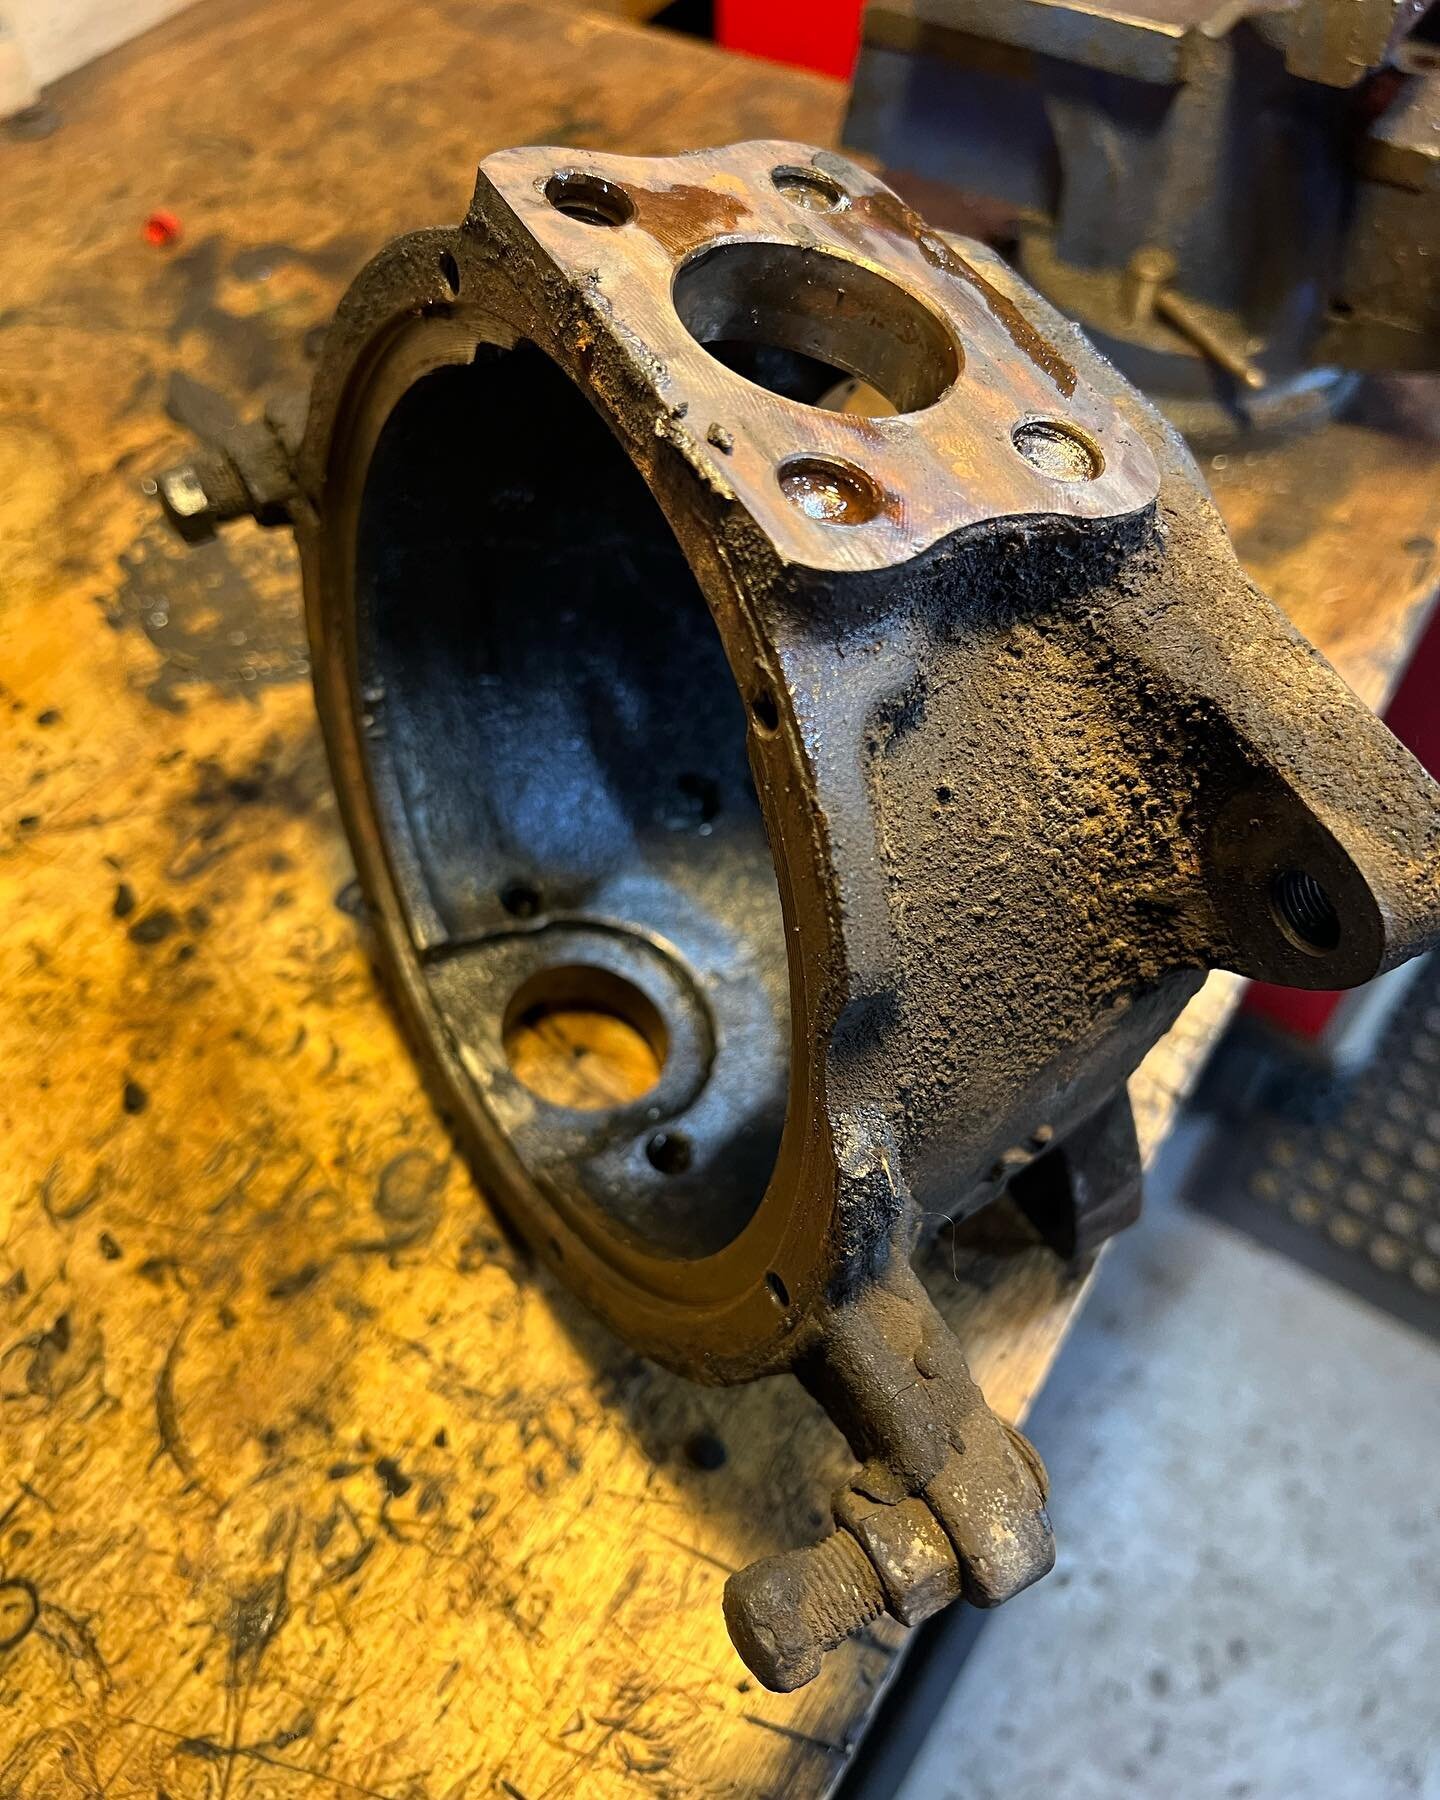 80 Series Land Cruiser owner: &ldquo;I have a leak at my front left wheel&rdquo;
The stud that wasn&rsquo;t broken was loose. Full swivel hub kit with bearings, new studs and all brakes.
#toyota #4wd #swivelhub #darylsmotors #service #restoration &am